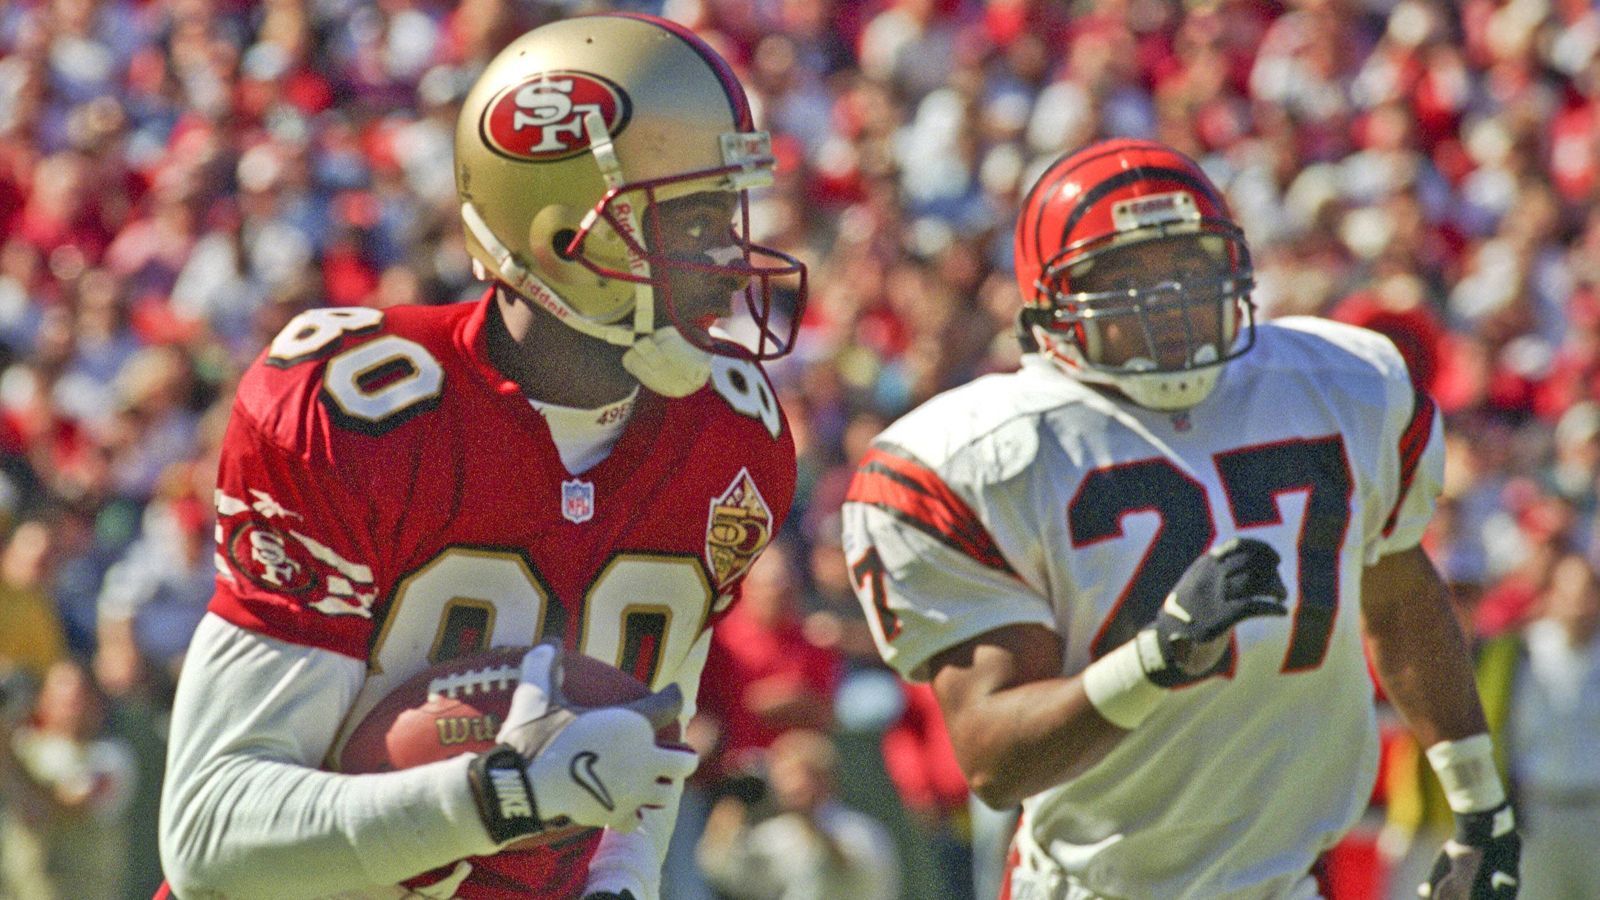 
                <strong>Jerry Rice</strong><br>
                Aktiv: 1985 - 2004Position: Wide ReceiverTeams: San Francisco 49ers, Oakland Raiser, Seattle Seahawks, Denver BroncosErfolge: 3x Super Bowl-Sieger, 13x Pro Bowl, 2x Offensive Player of the Year, All Time Receiving Leader in der NFL (22.895 Yards)
              